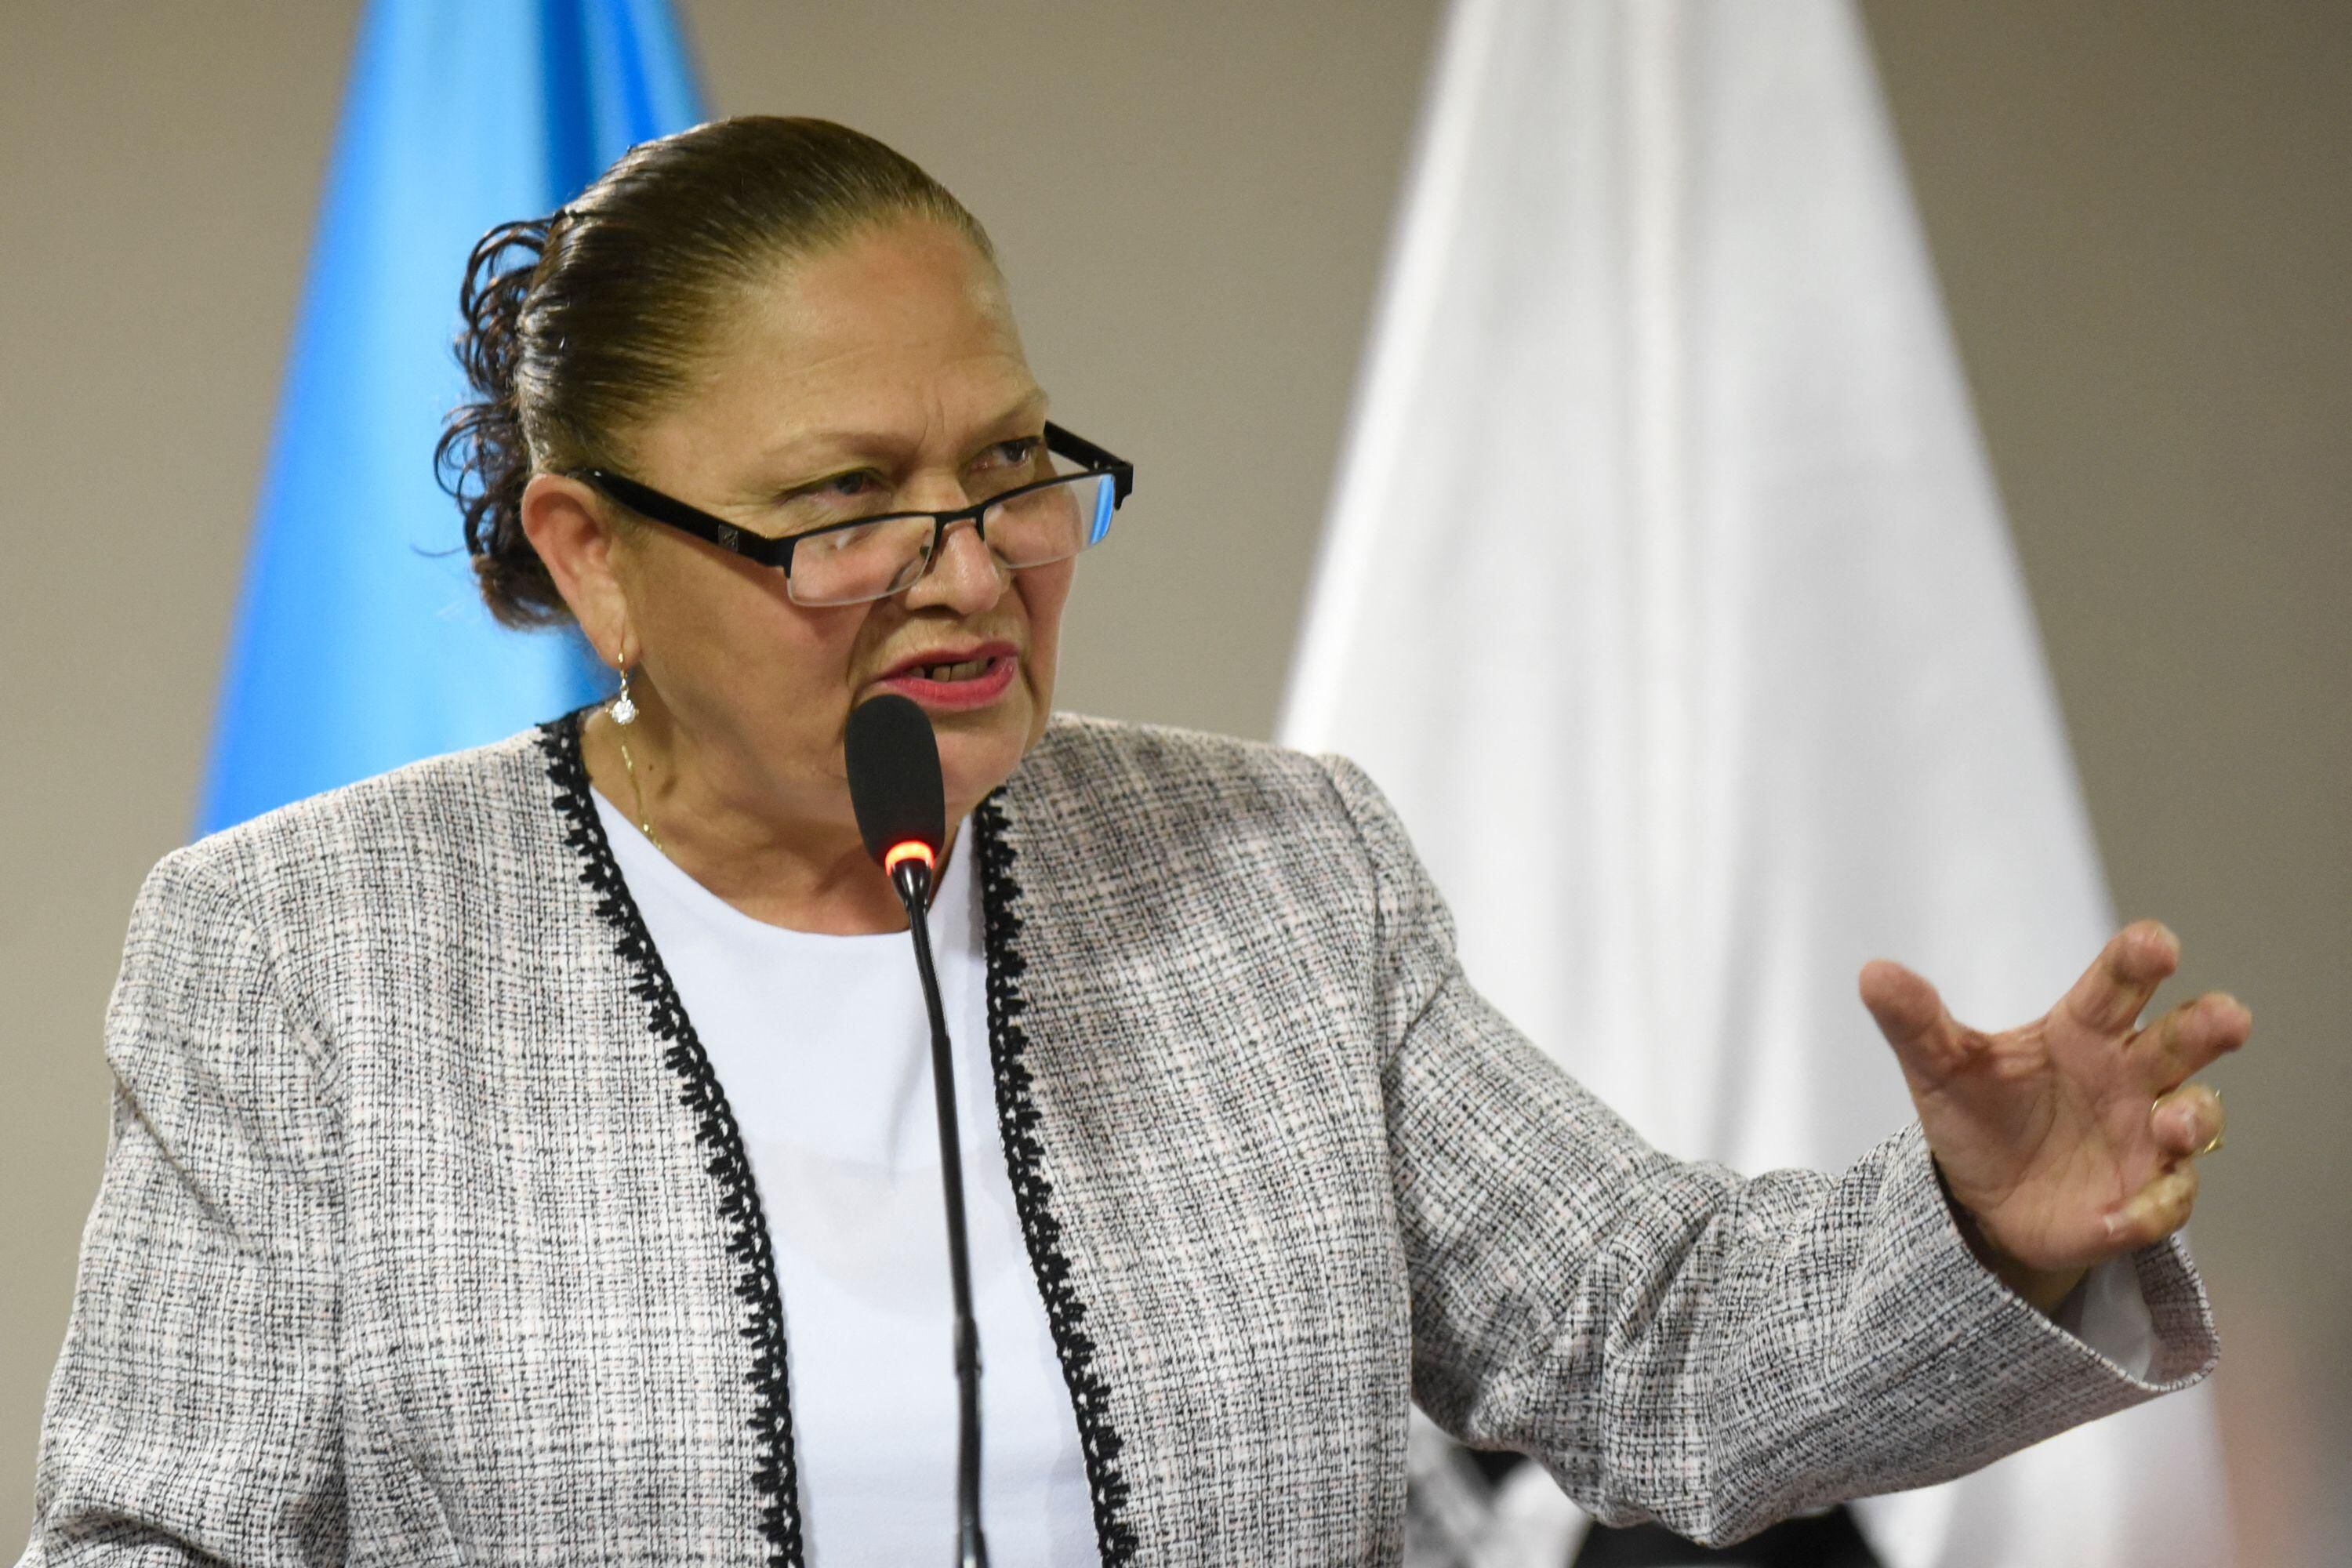 Guatemala's Attorney General, Consuelo Porras, is identified by Arévalo as part of the officials trying to prevent his presidential mandate.